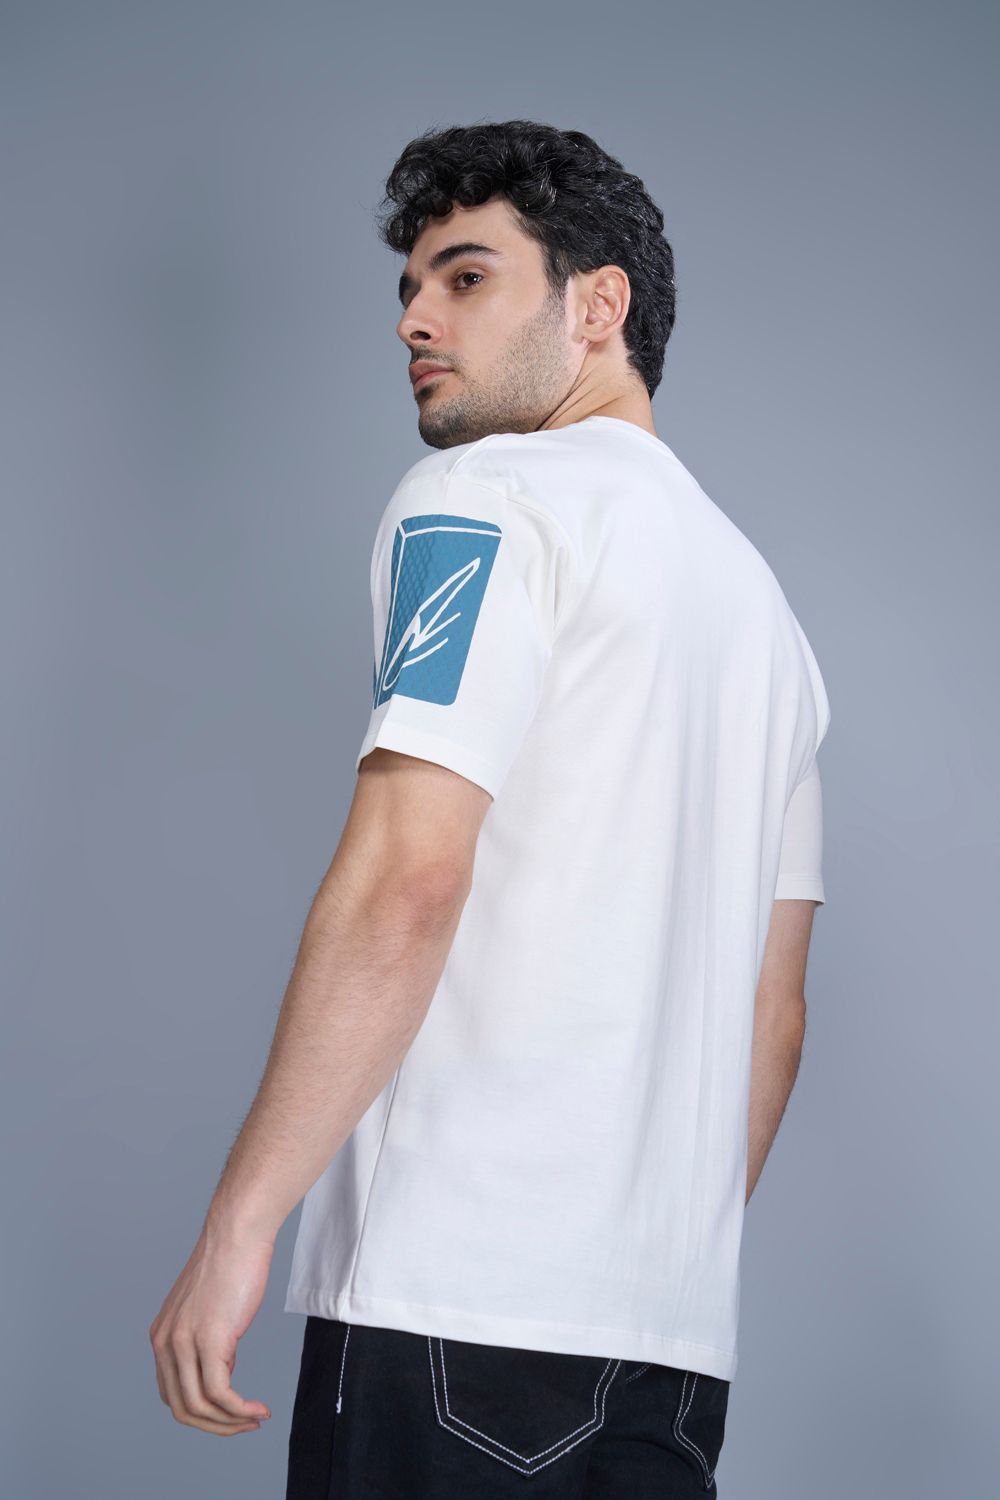 Cotton oversized T shirt for men in the solid color White with half sleeves and crew neck, back view.